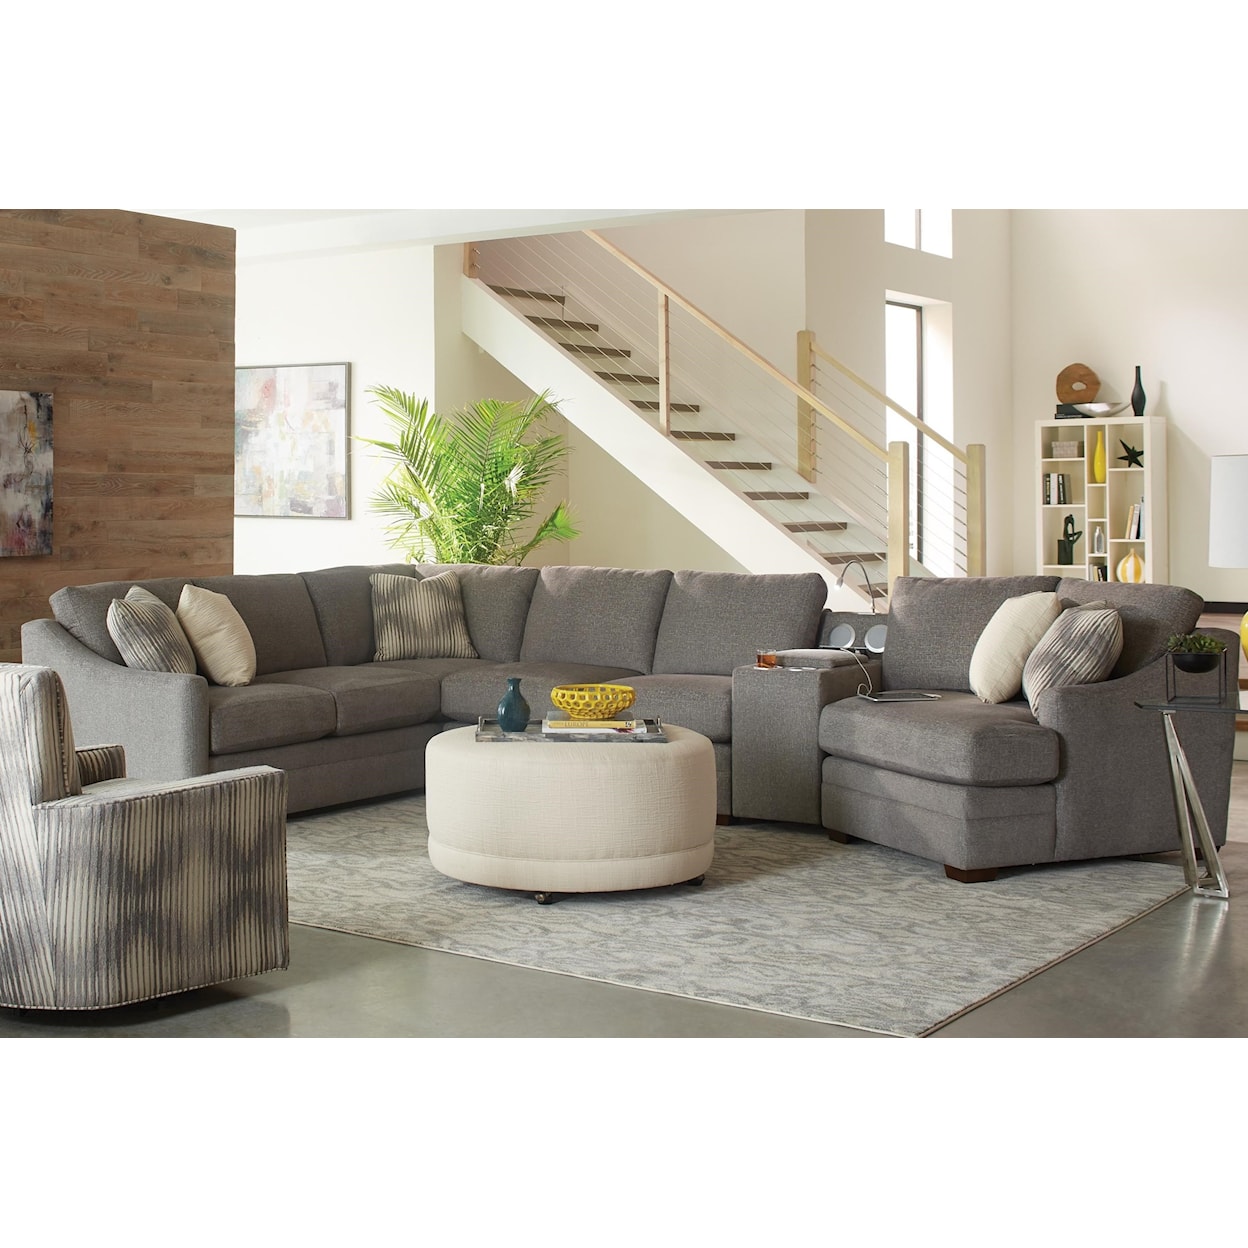 Hickory Craft F9 Series 4 pc Sectional Sofa w/ Power Console